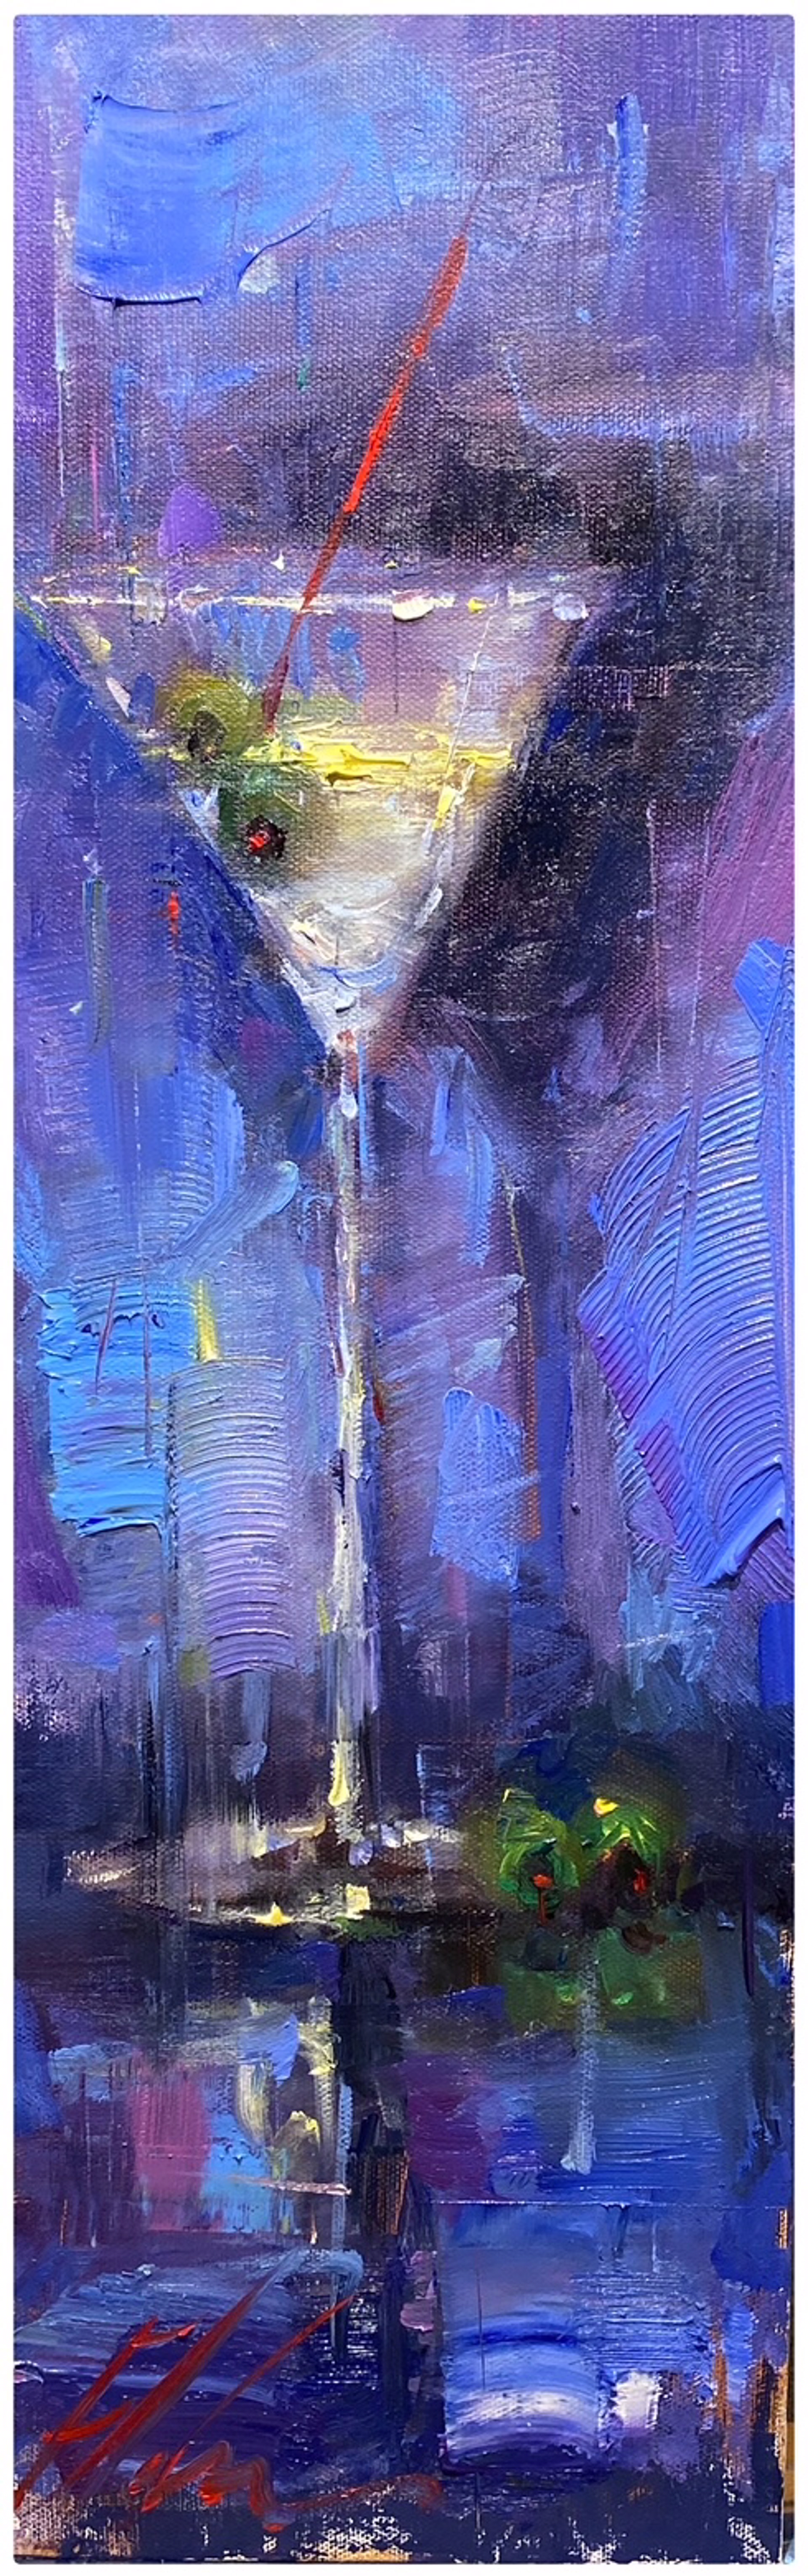 Untitled (Martini) by Michael Flohr